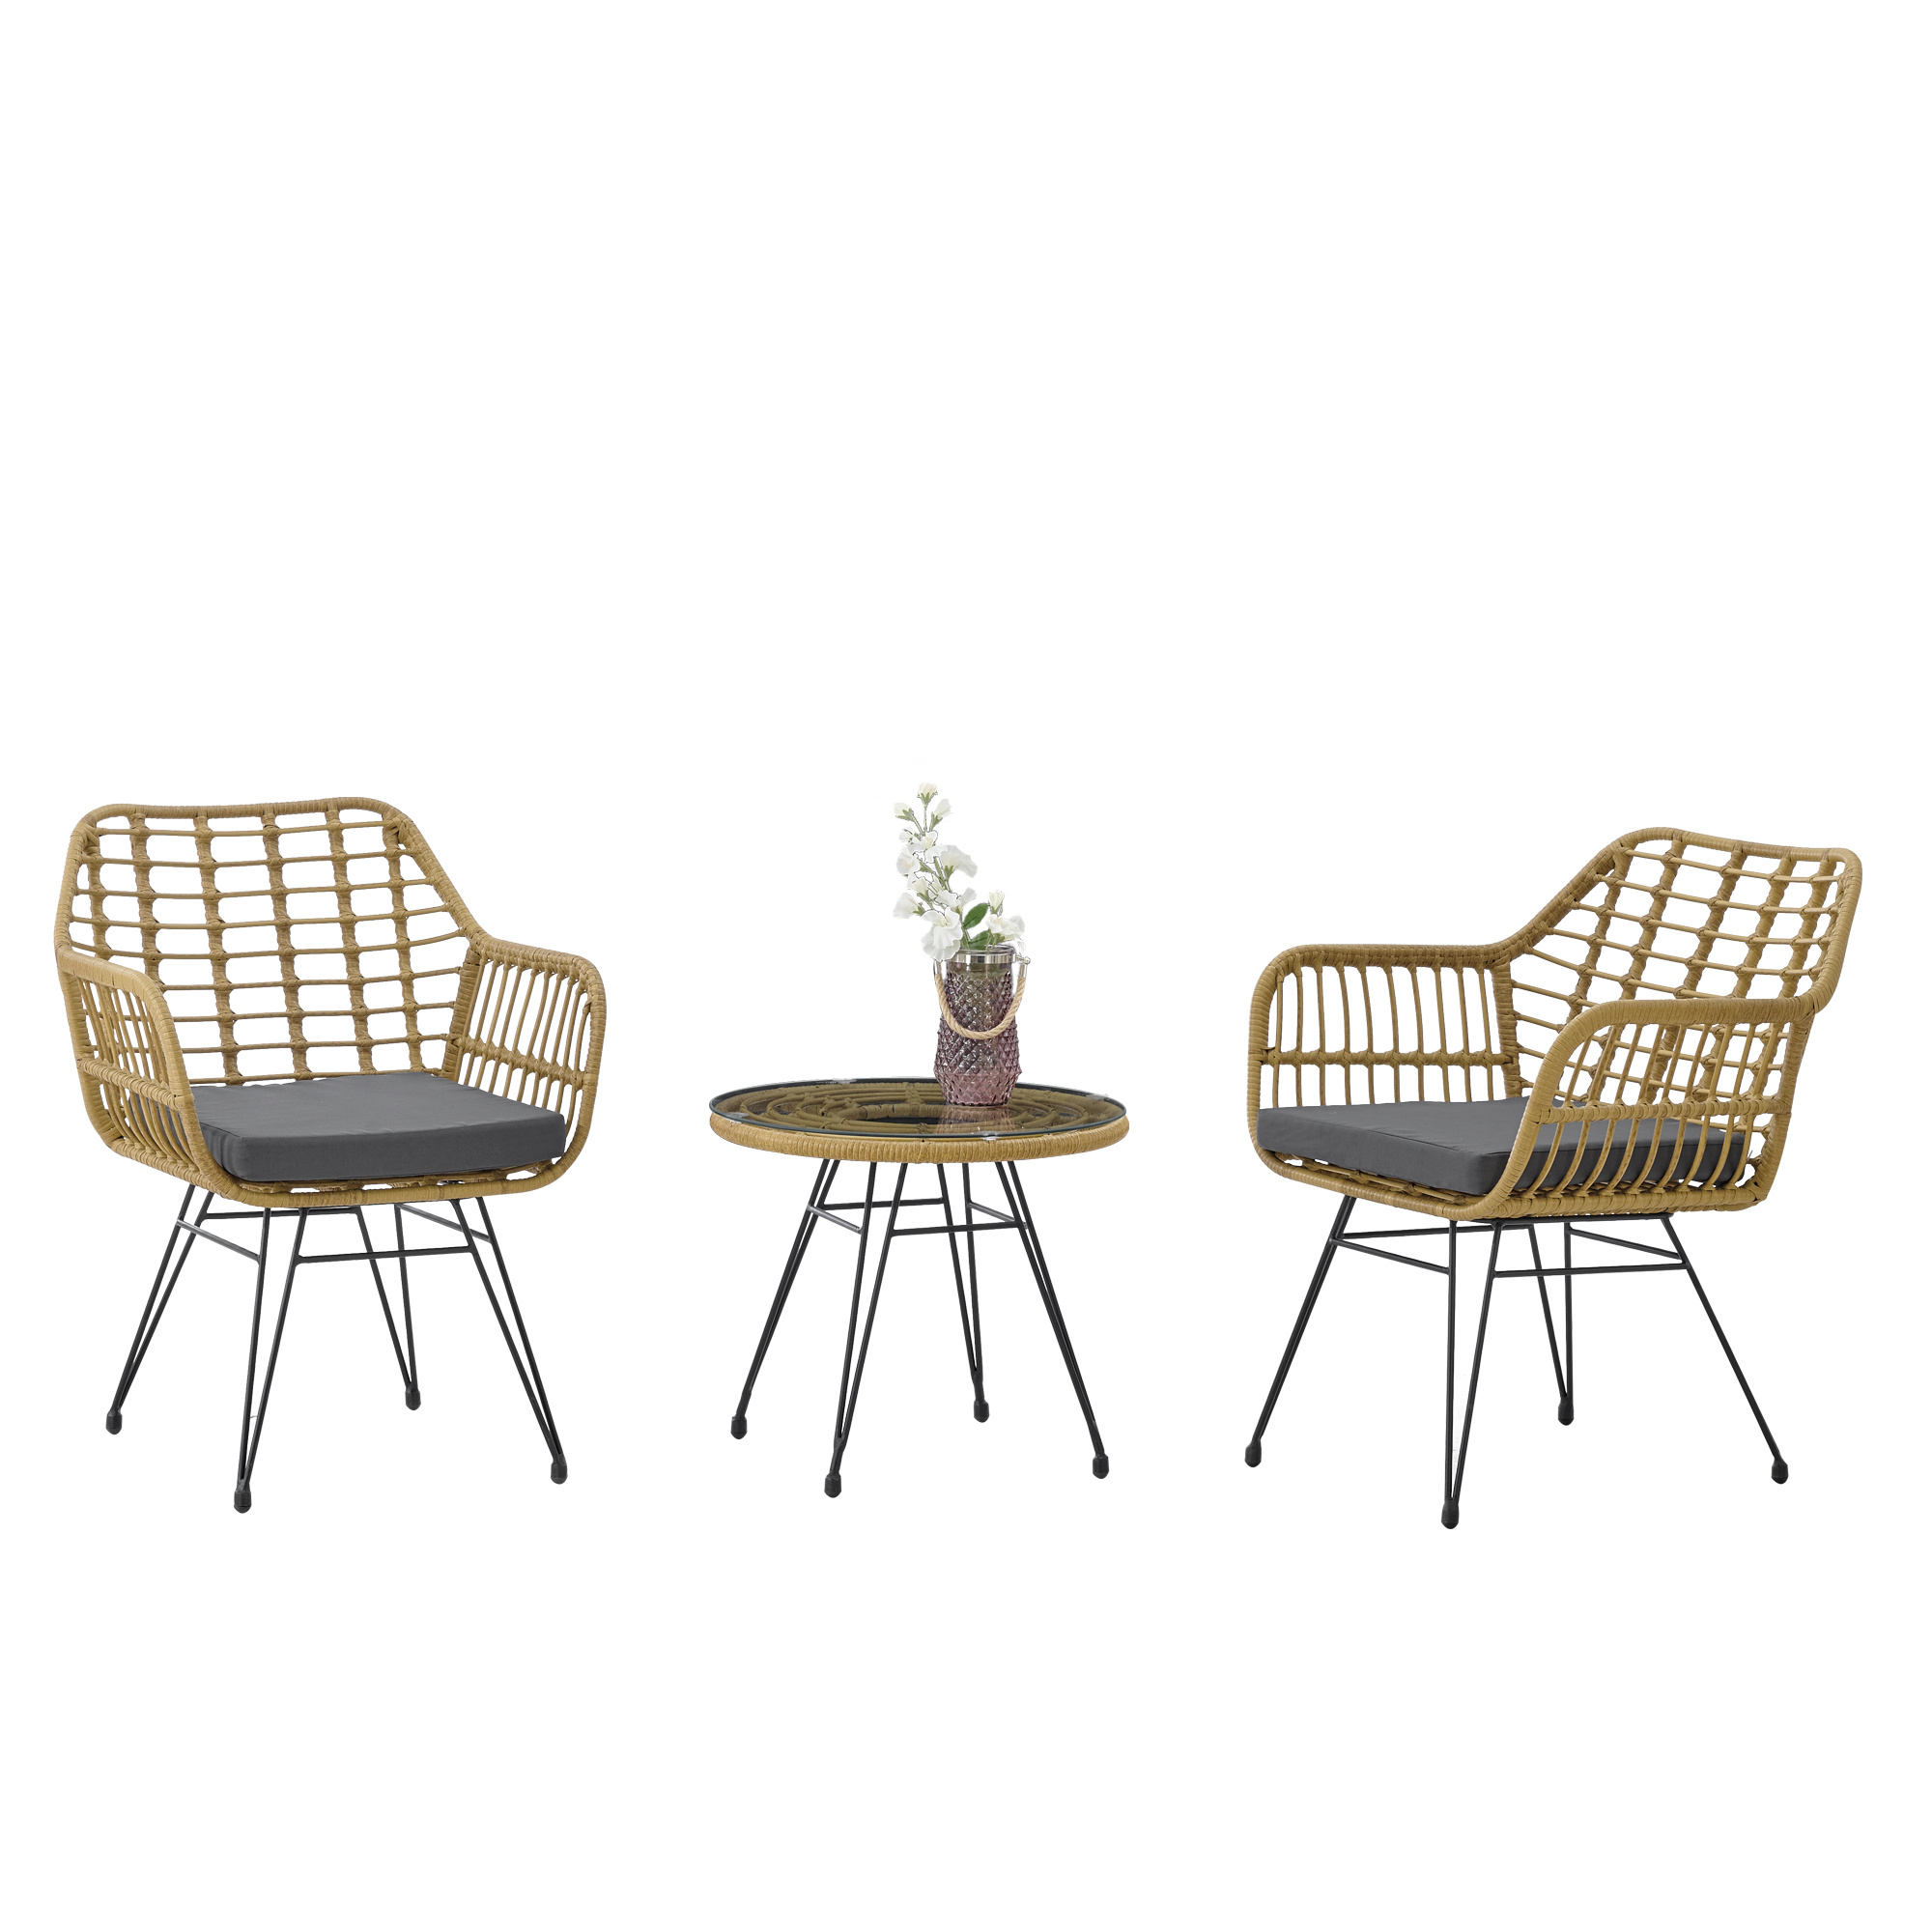 Aukfa 3 Pieces table set,Modern Rattan Coffee Chair Table Set,Outdoor Furniture Rattan Chair,Garden Set with Two Chair and One Table,Conversation Set - image 1 of 9